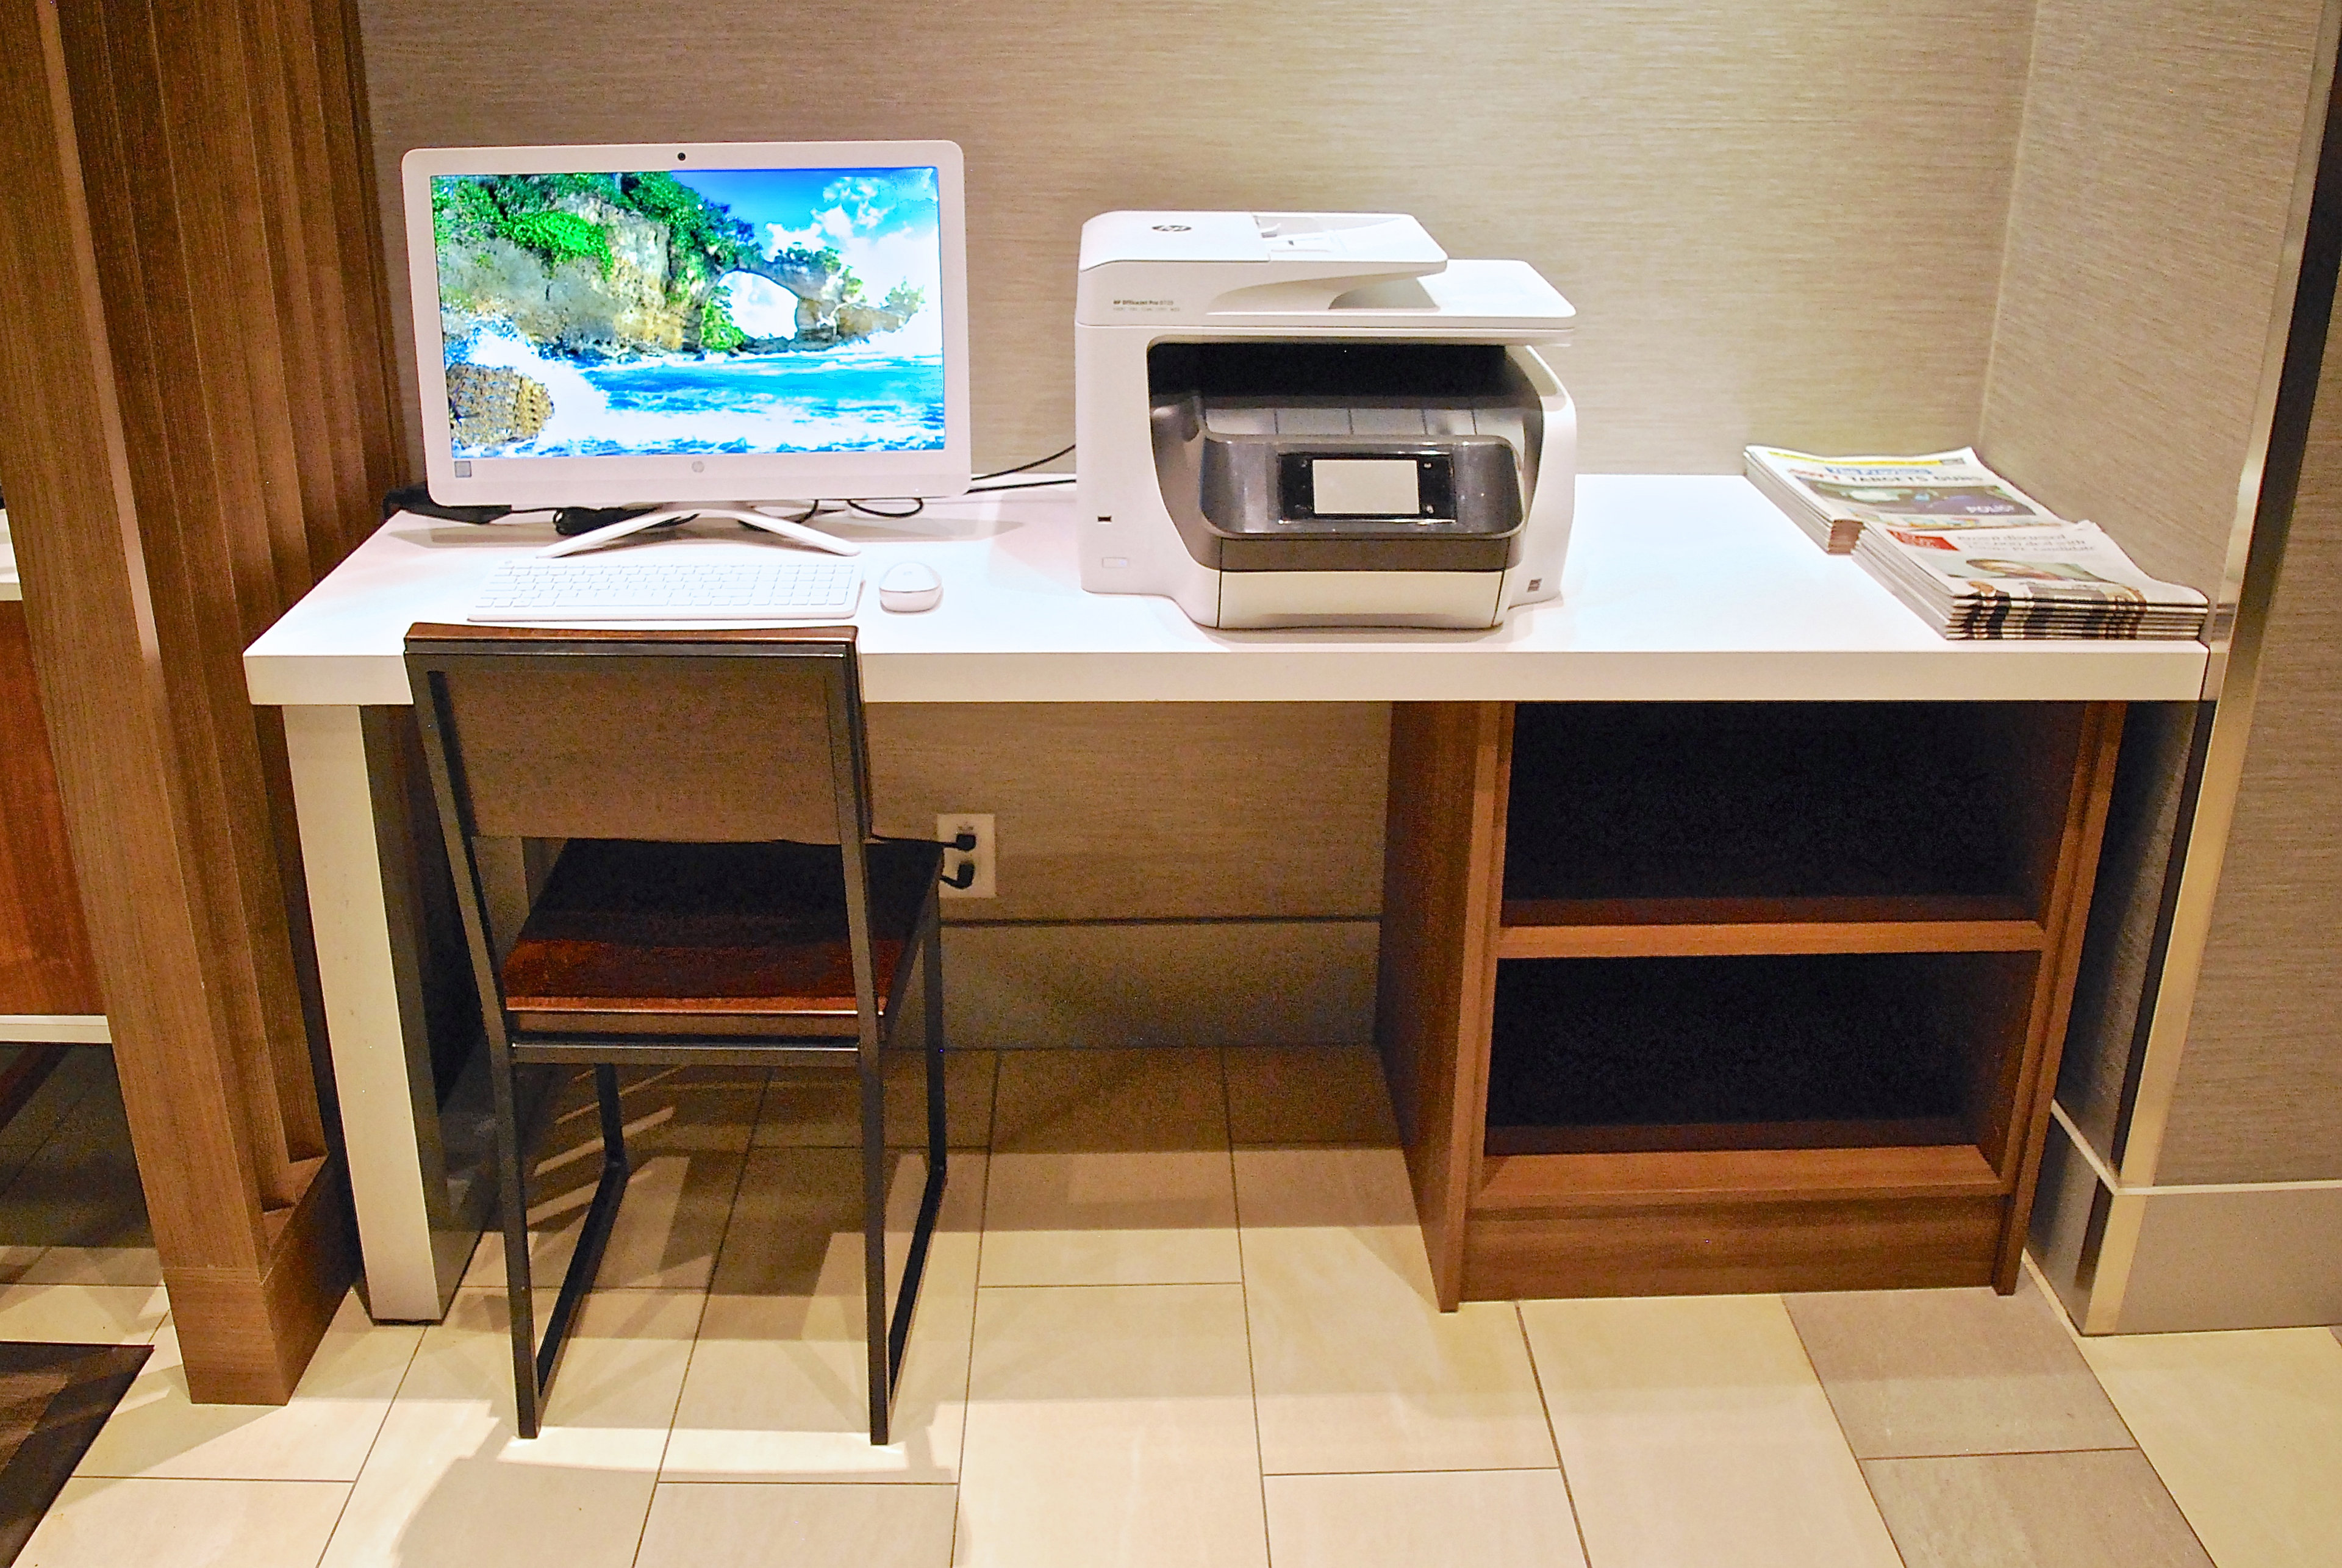 Be productive while on the go at our Business Center.